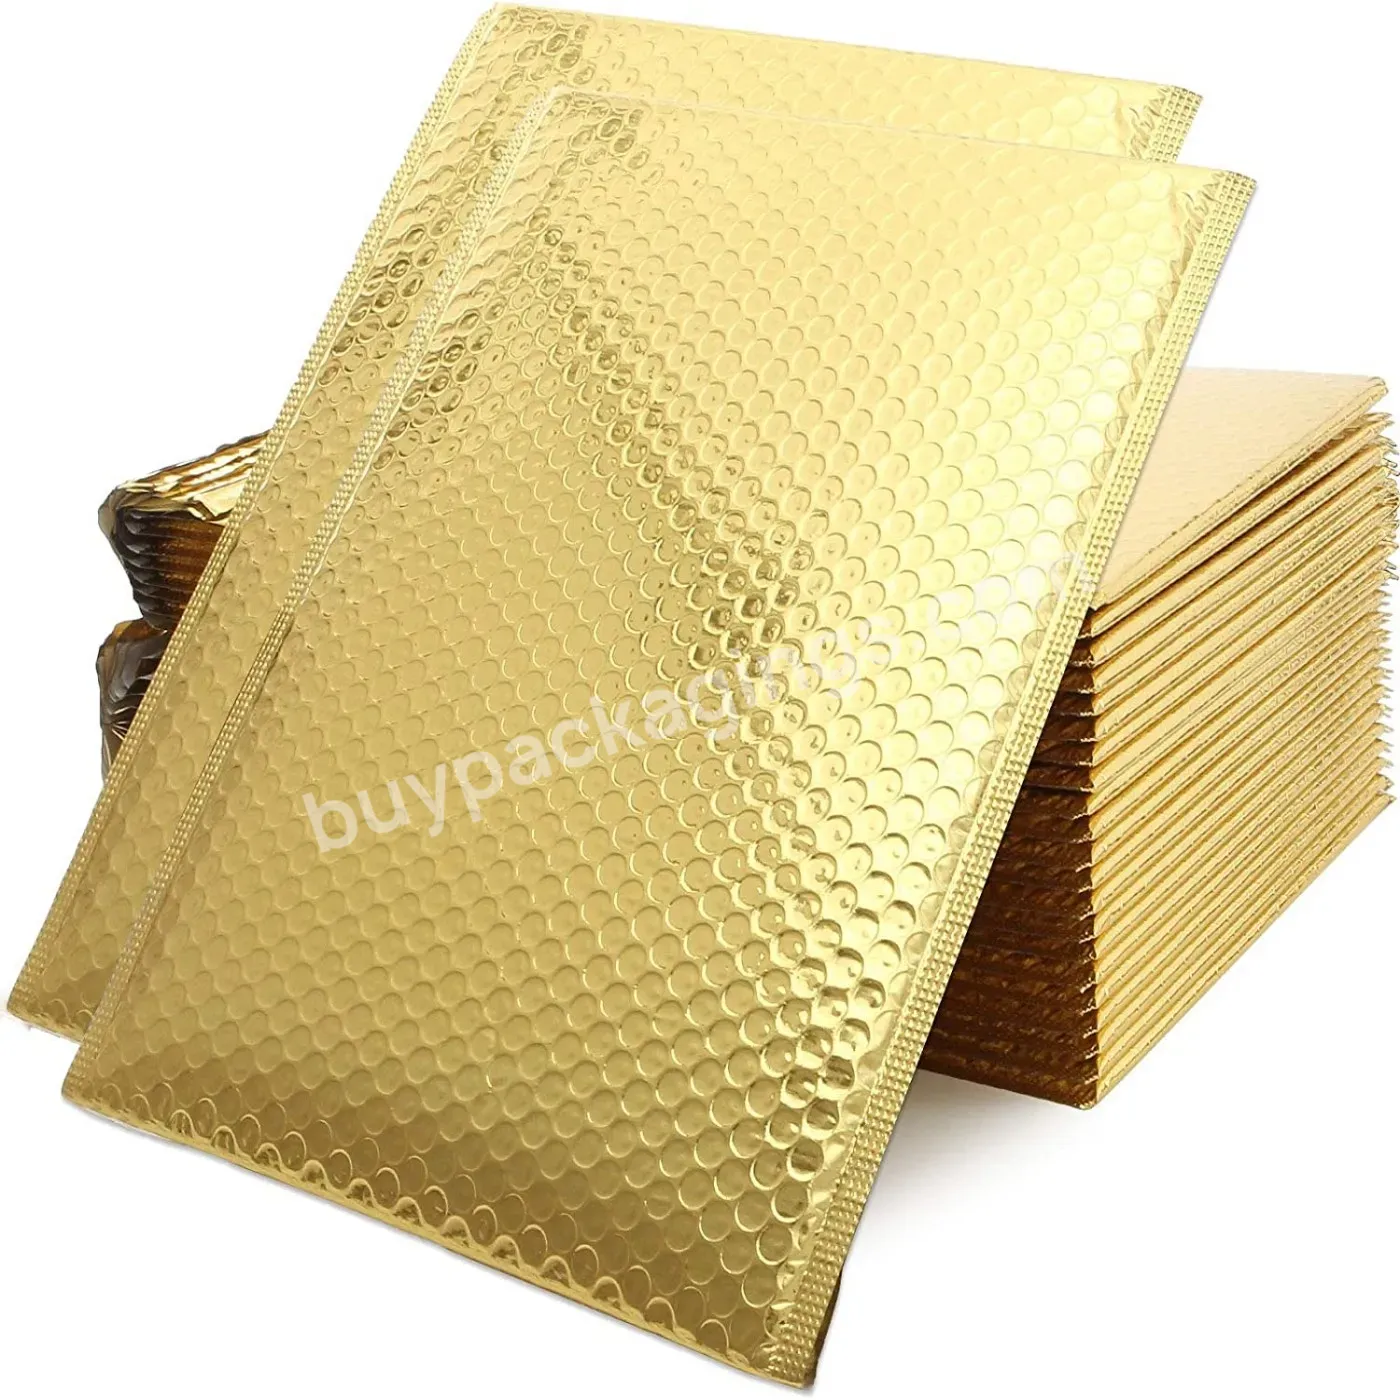 Ctcx Custom Polybag Mailing Shipping Metallic Holographic Foil Glitter Bubble Mailers Gold Glamour Metallic Bubble Mailers - Buy Metallic Bags Metallic Bubble Mailer Metallic Gift Bag Metallic Envelope Pink Envelops Metallic Metallic Gold Bubble Mail